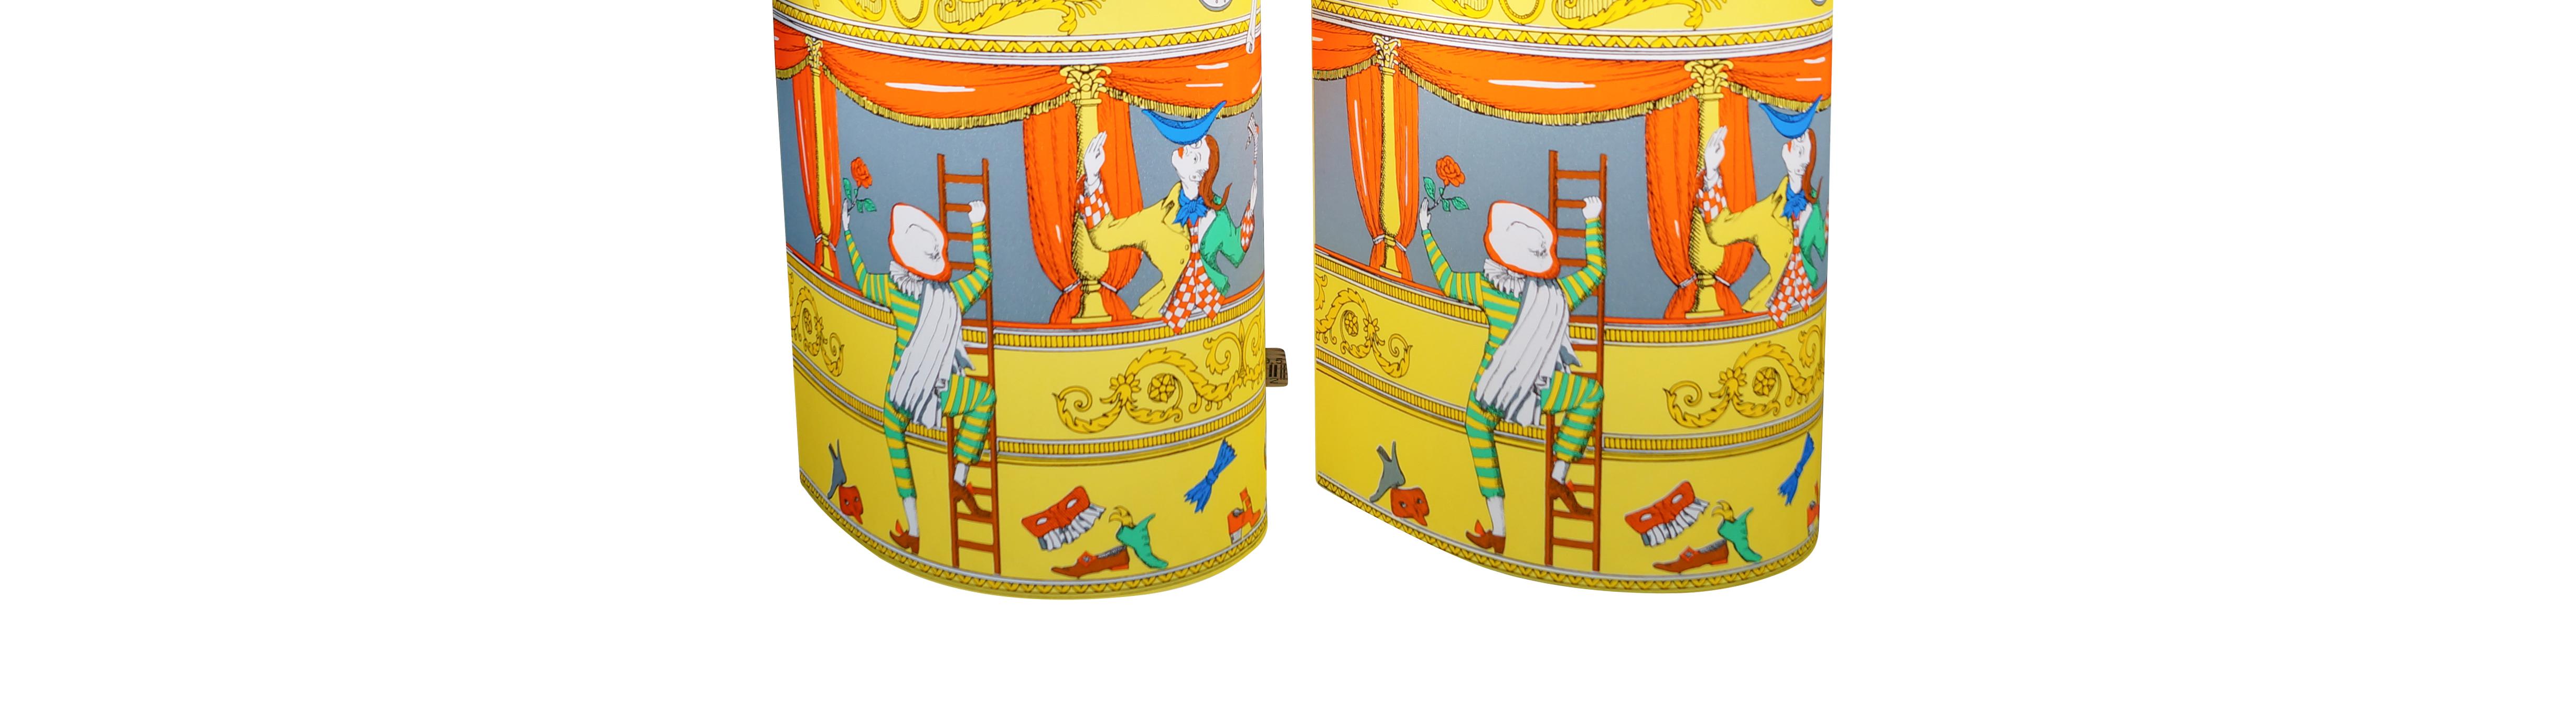 Late 20th Century Perspex Table Lamps Pair by Barnaba Fornasetti Commedia Italiana Media, 1995 For Sale